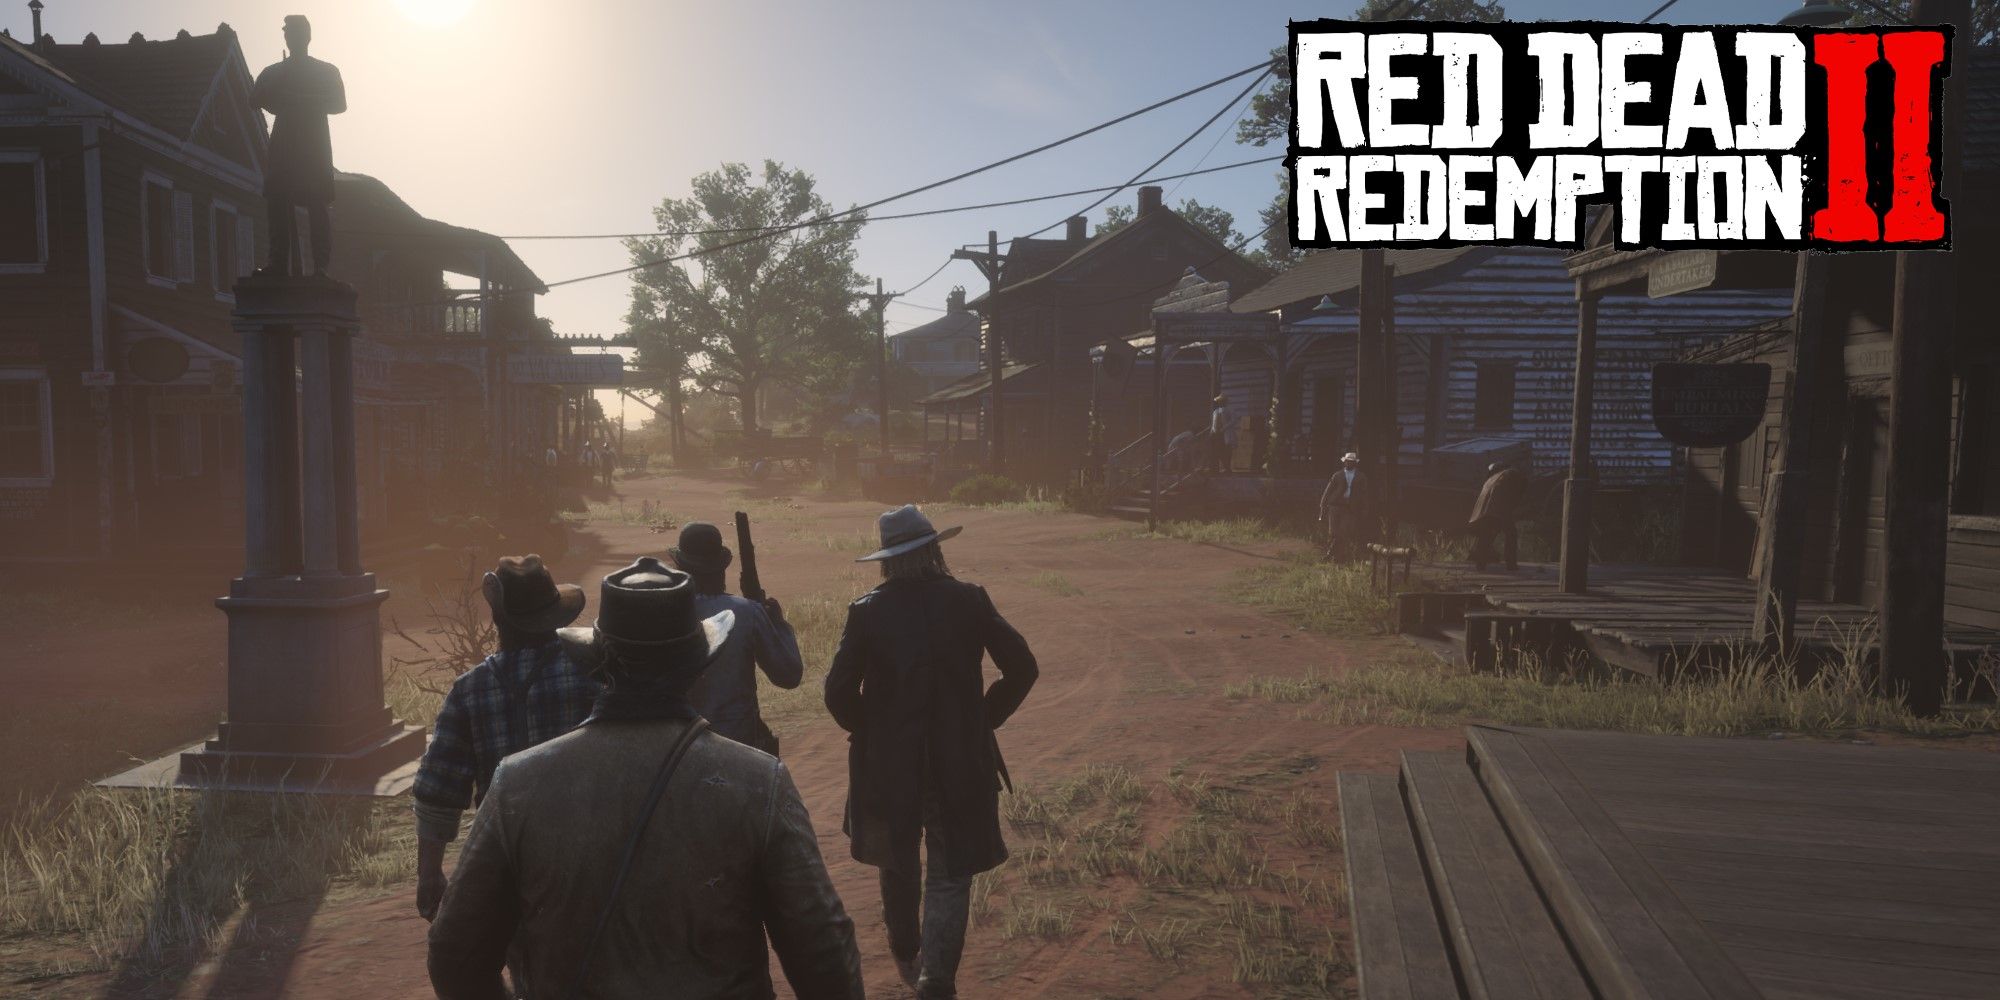 Red Dead Redemption 2 Arthur Morgan walking into Rhodes with Micah Bell III Bill Williamson and Sean Macguire with game logo